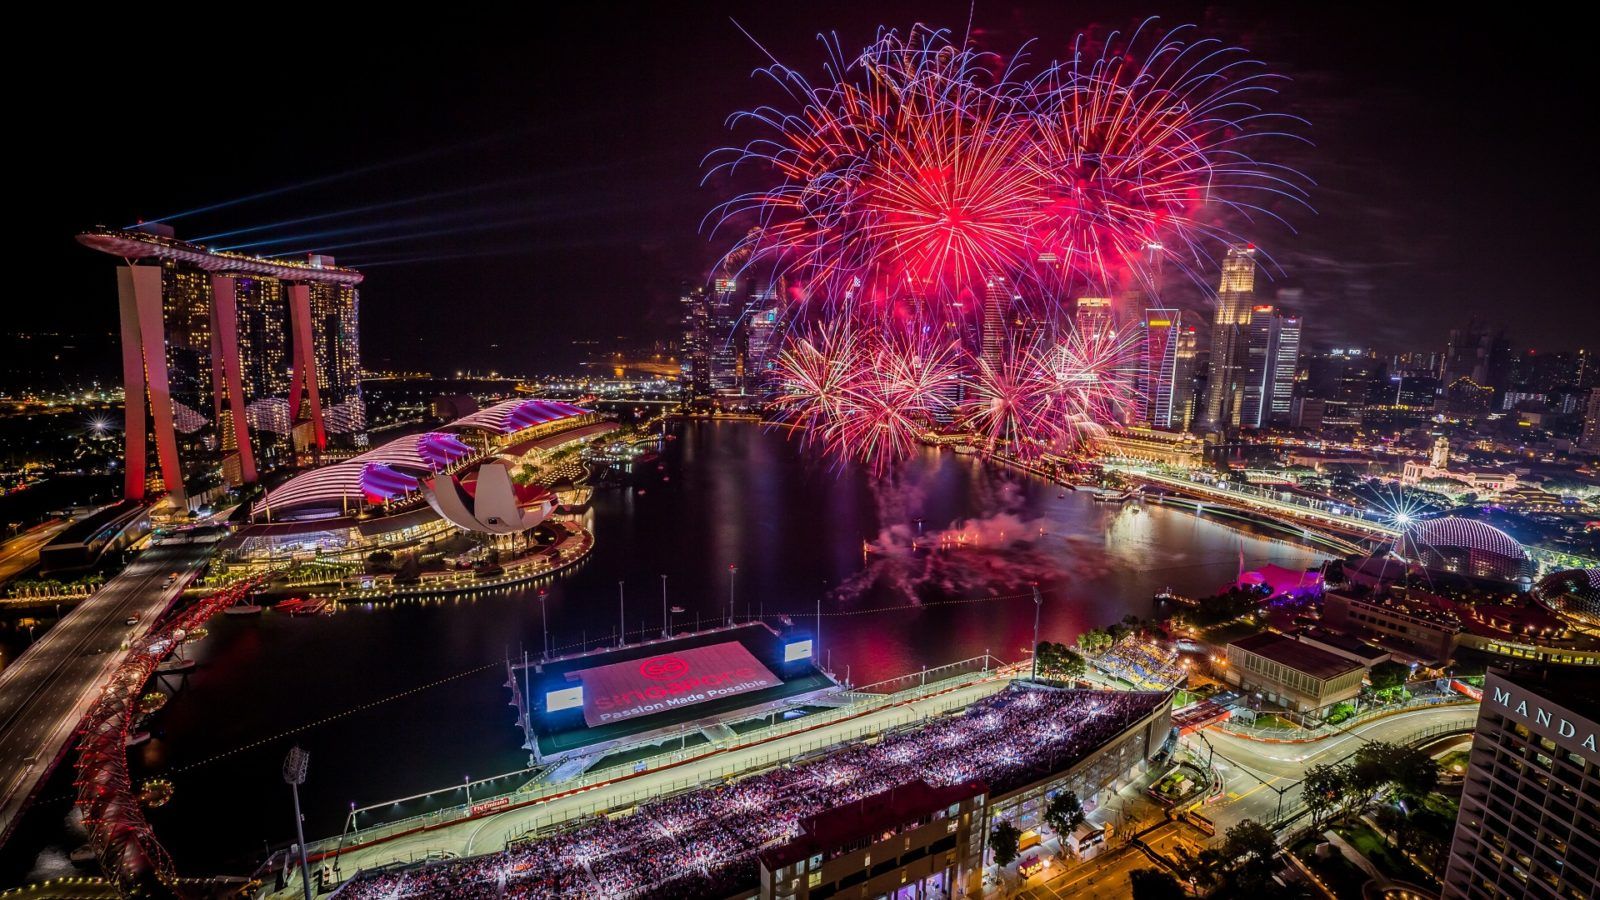 Formula One renews contract with Singapore Grand Prix until 2028